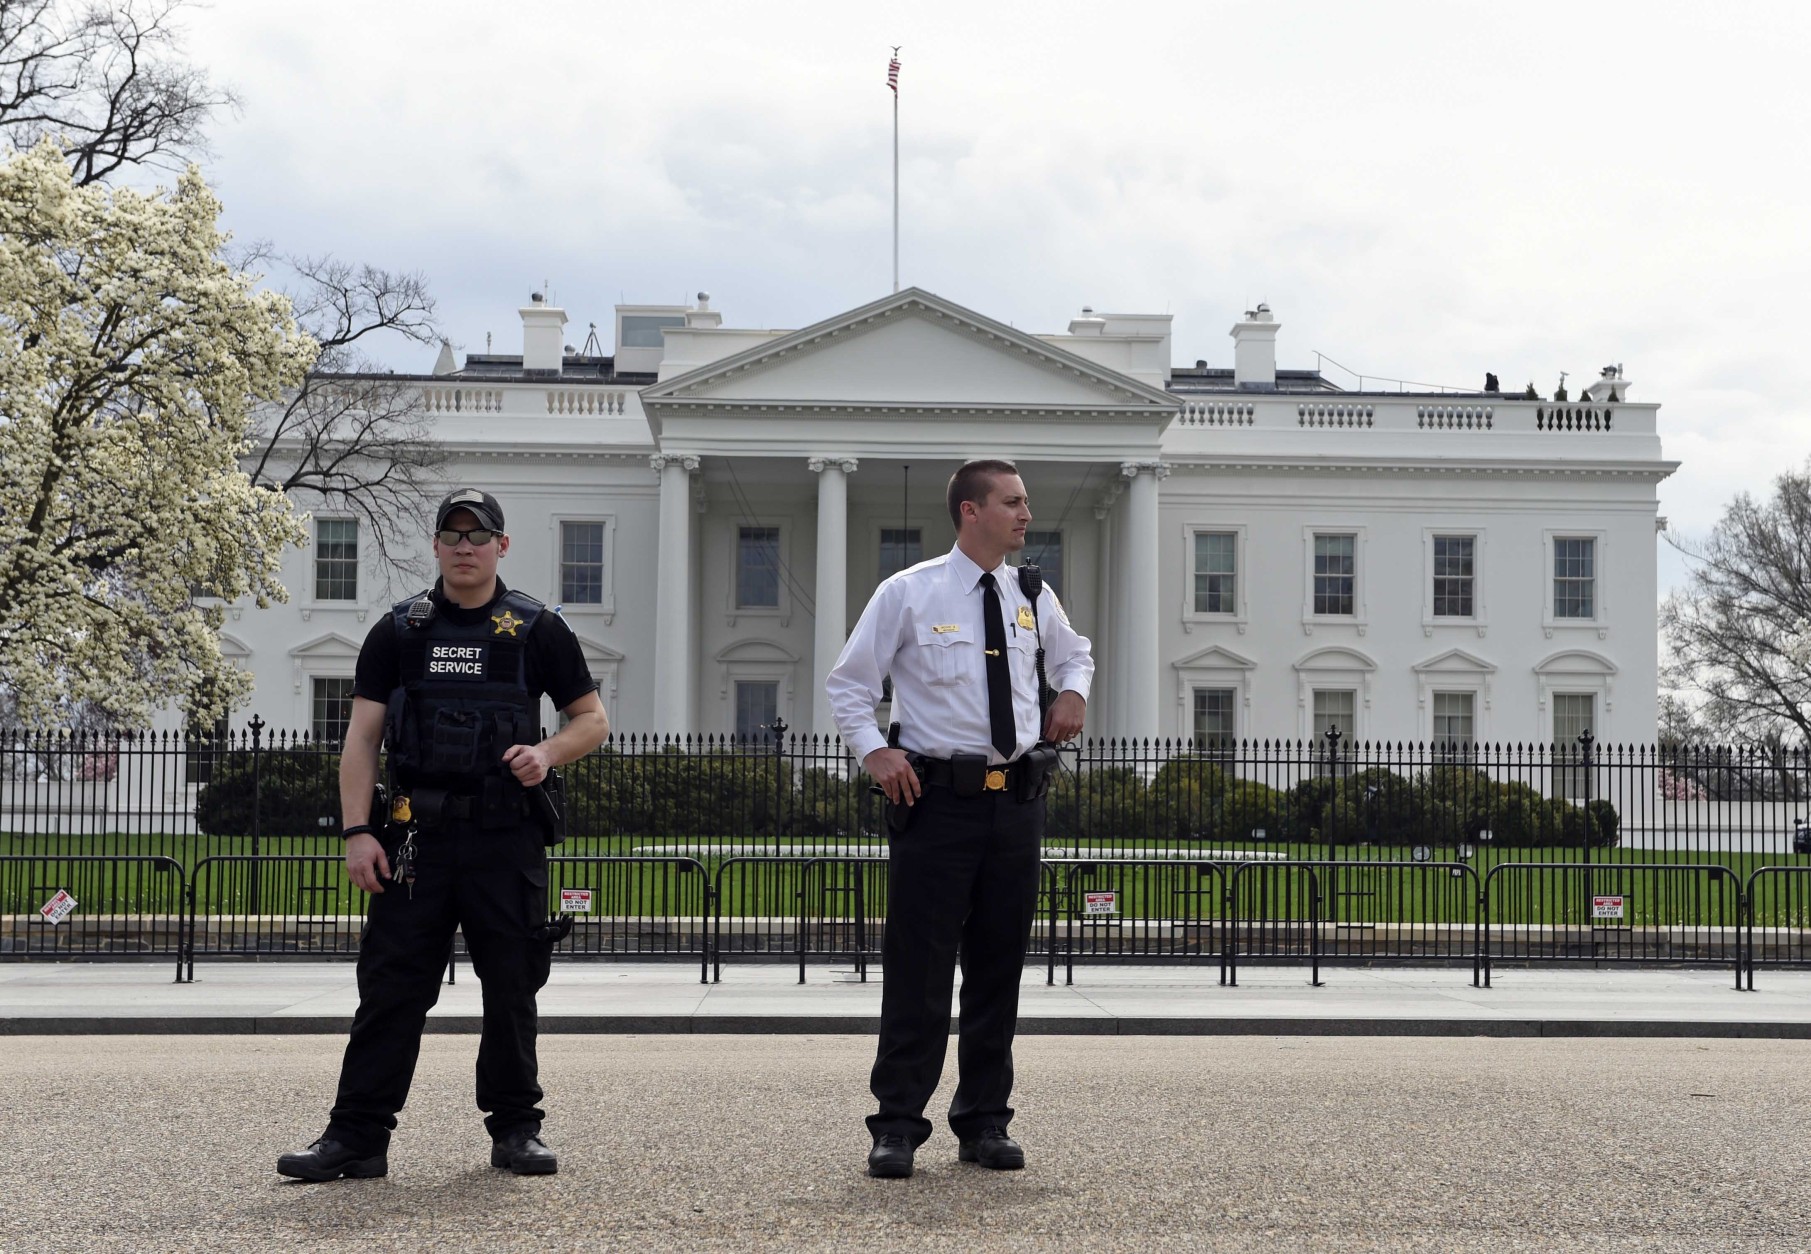 Members of the Secret Service stand on Pennsylvania Avenue outside the White House in Washington, Tuesday, April 7, 2015. The White House, State Department, and Capitol were all affected by reports of widespread power outages across Washington and its suburbs Tuesday afternoon.  (AP Photo/Susan Walsh)